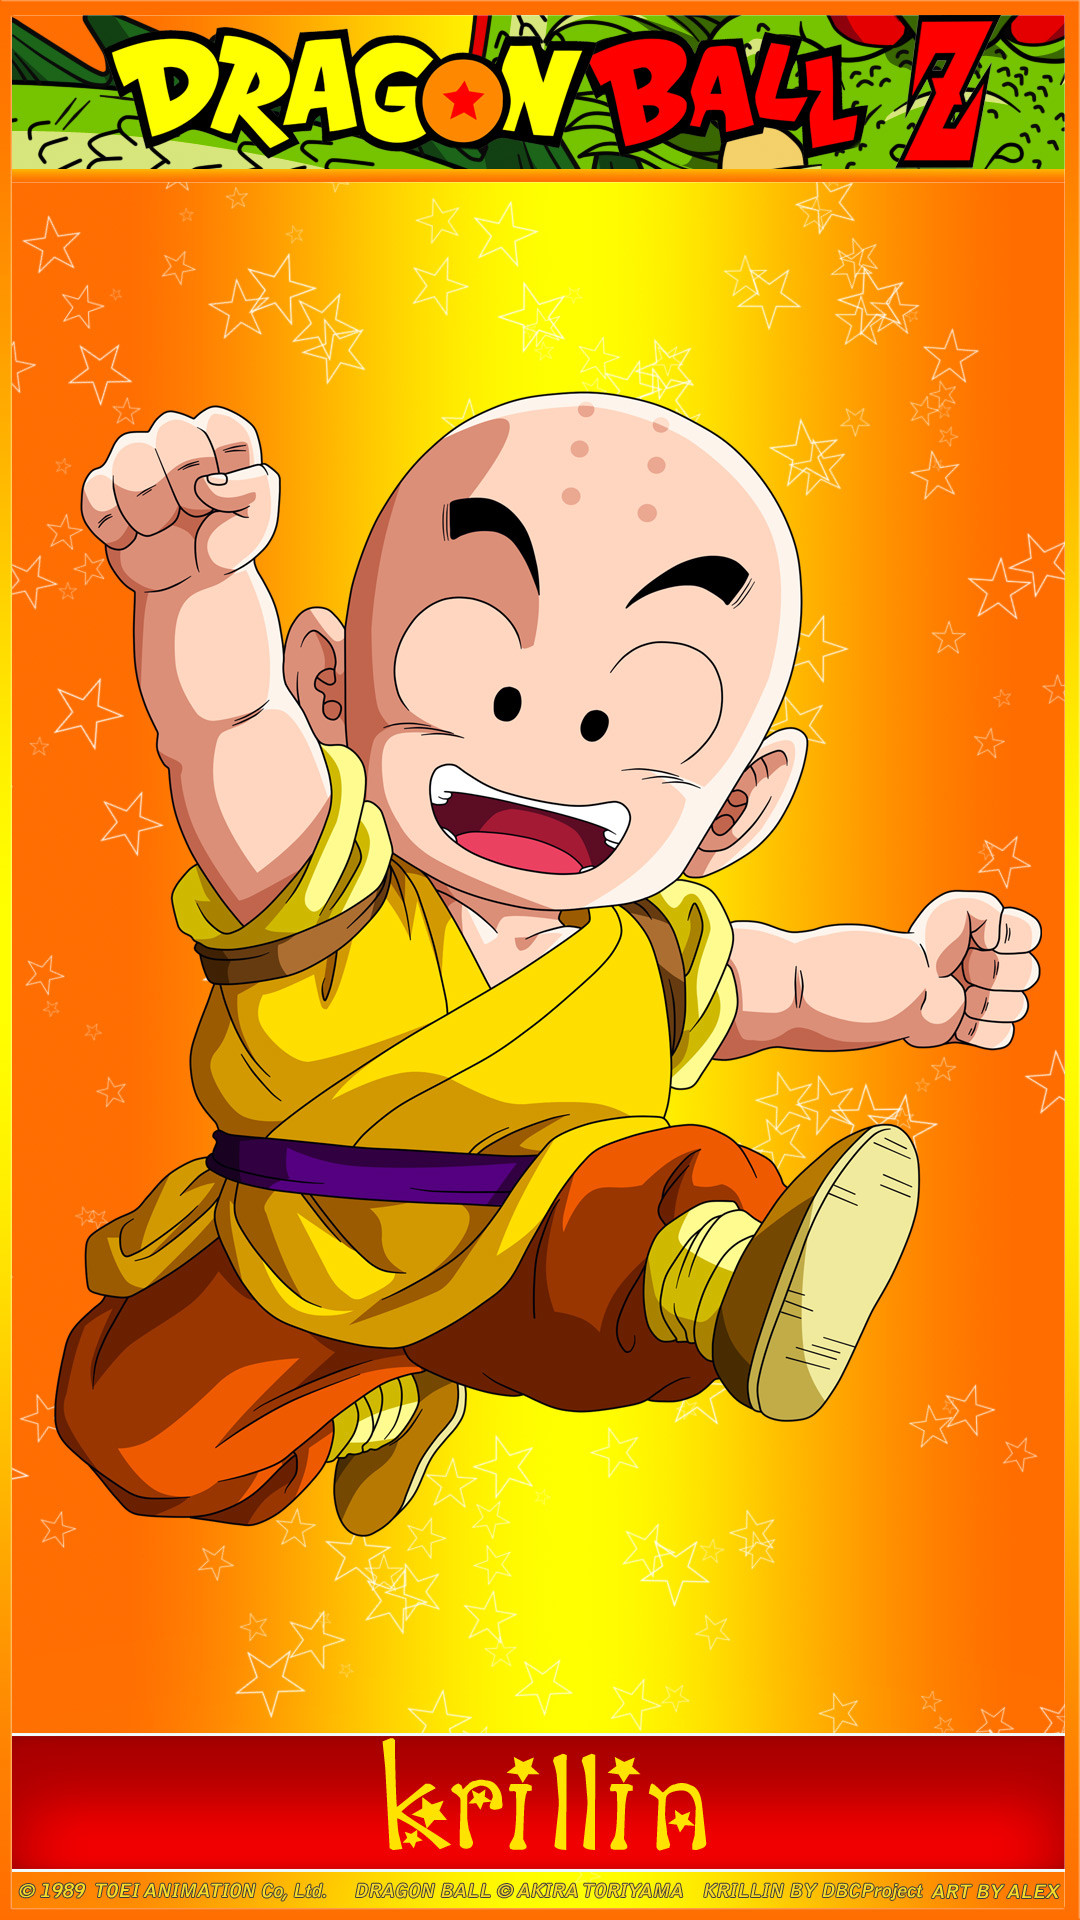 1080x1920 Free Dragon Ball Z Krillin, computer desktop wallpapers, pictures, images